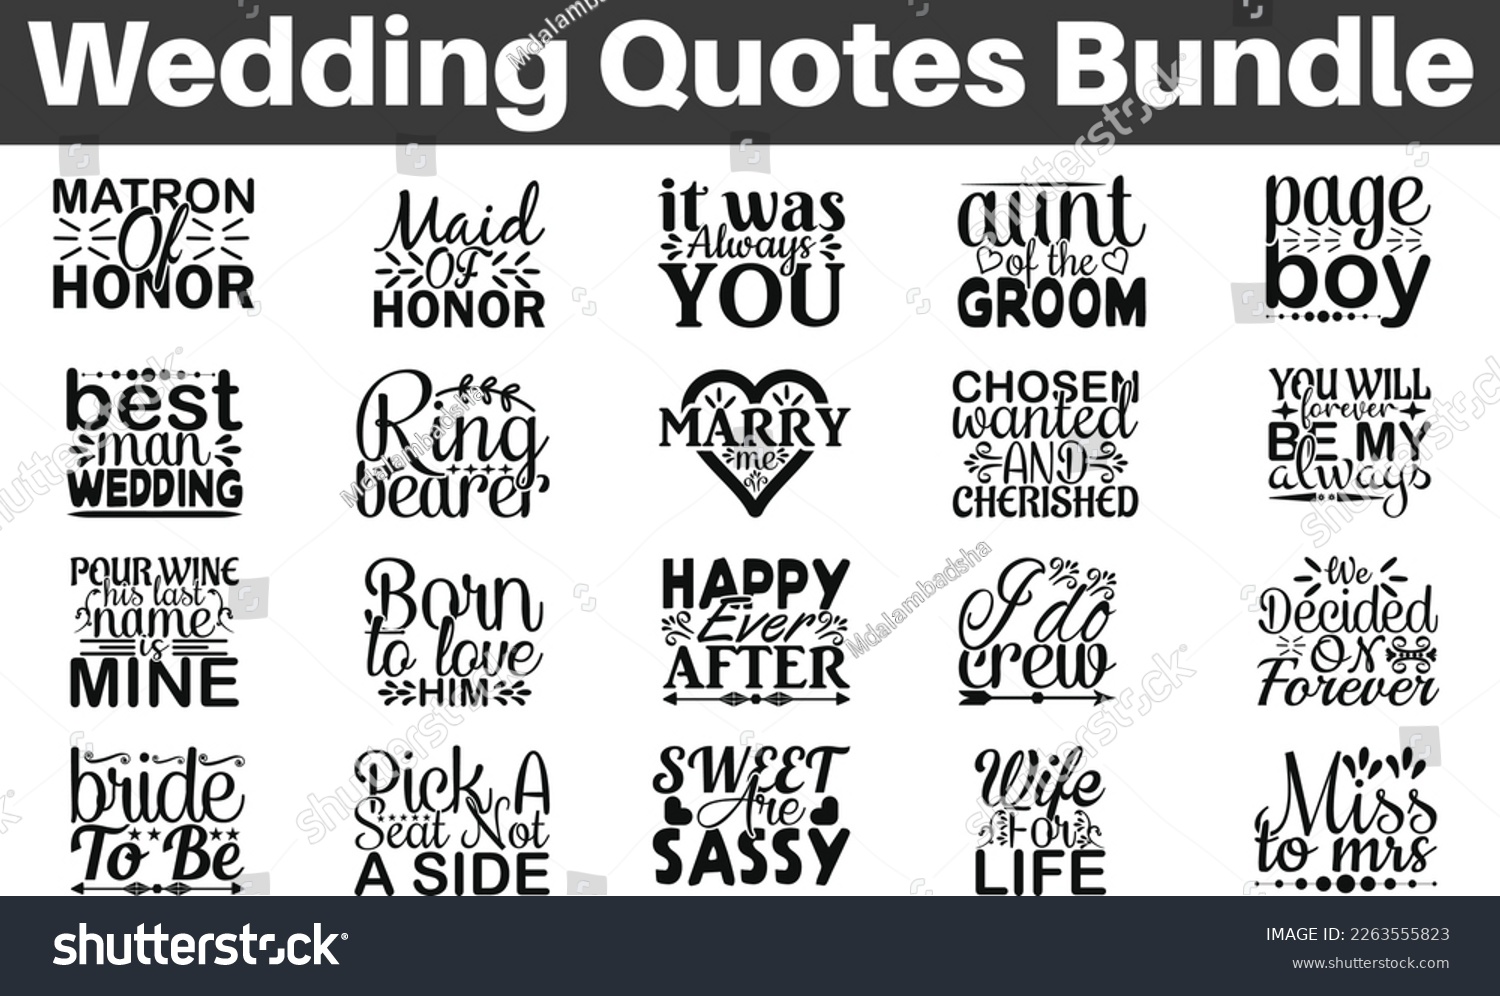 SVG of Wedding Quotes Bundle, Wedding quotes SVG cut files, Saying about Wedding,  Magical cut files, Wedding cut files Bundle of SVG eps Files for Cuttin svg